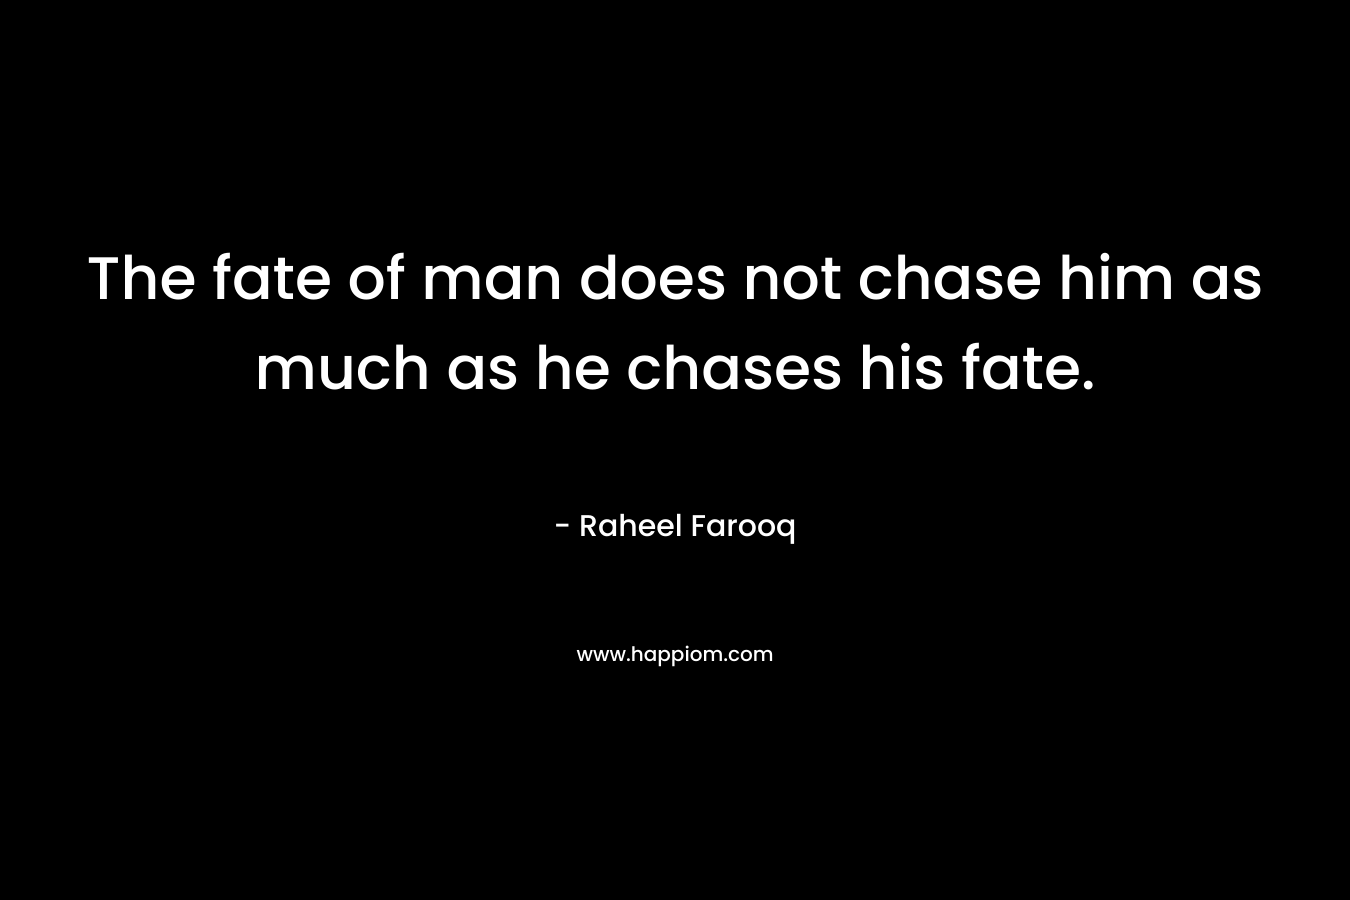 The fate of man does not chase him as much as he chases his fate. – Raheel Farooq